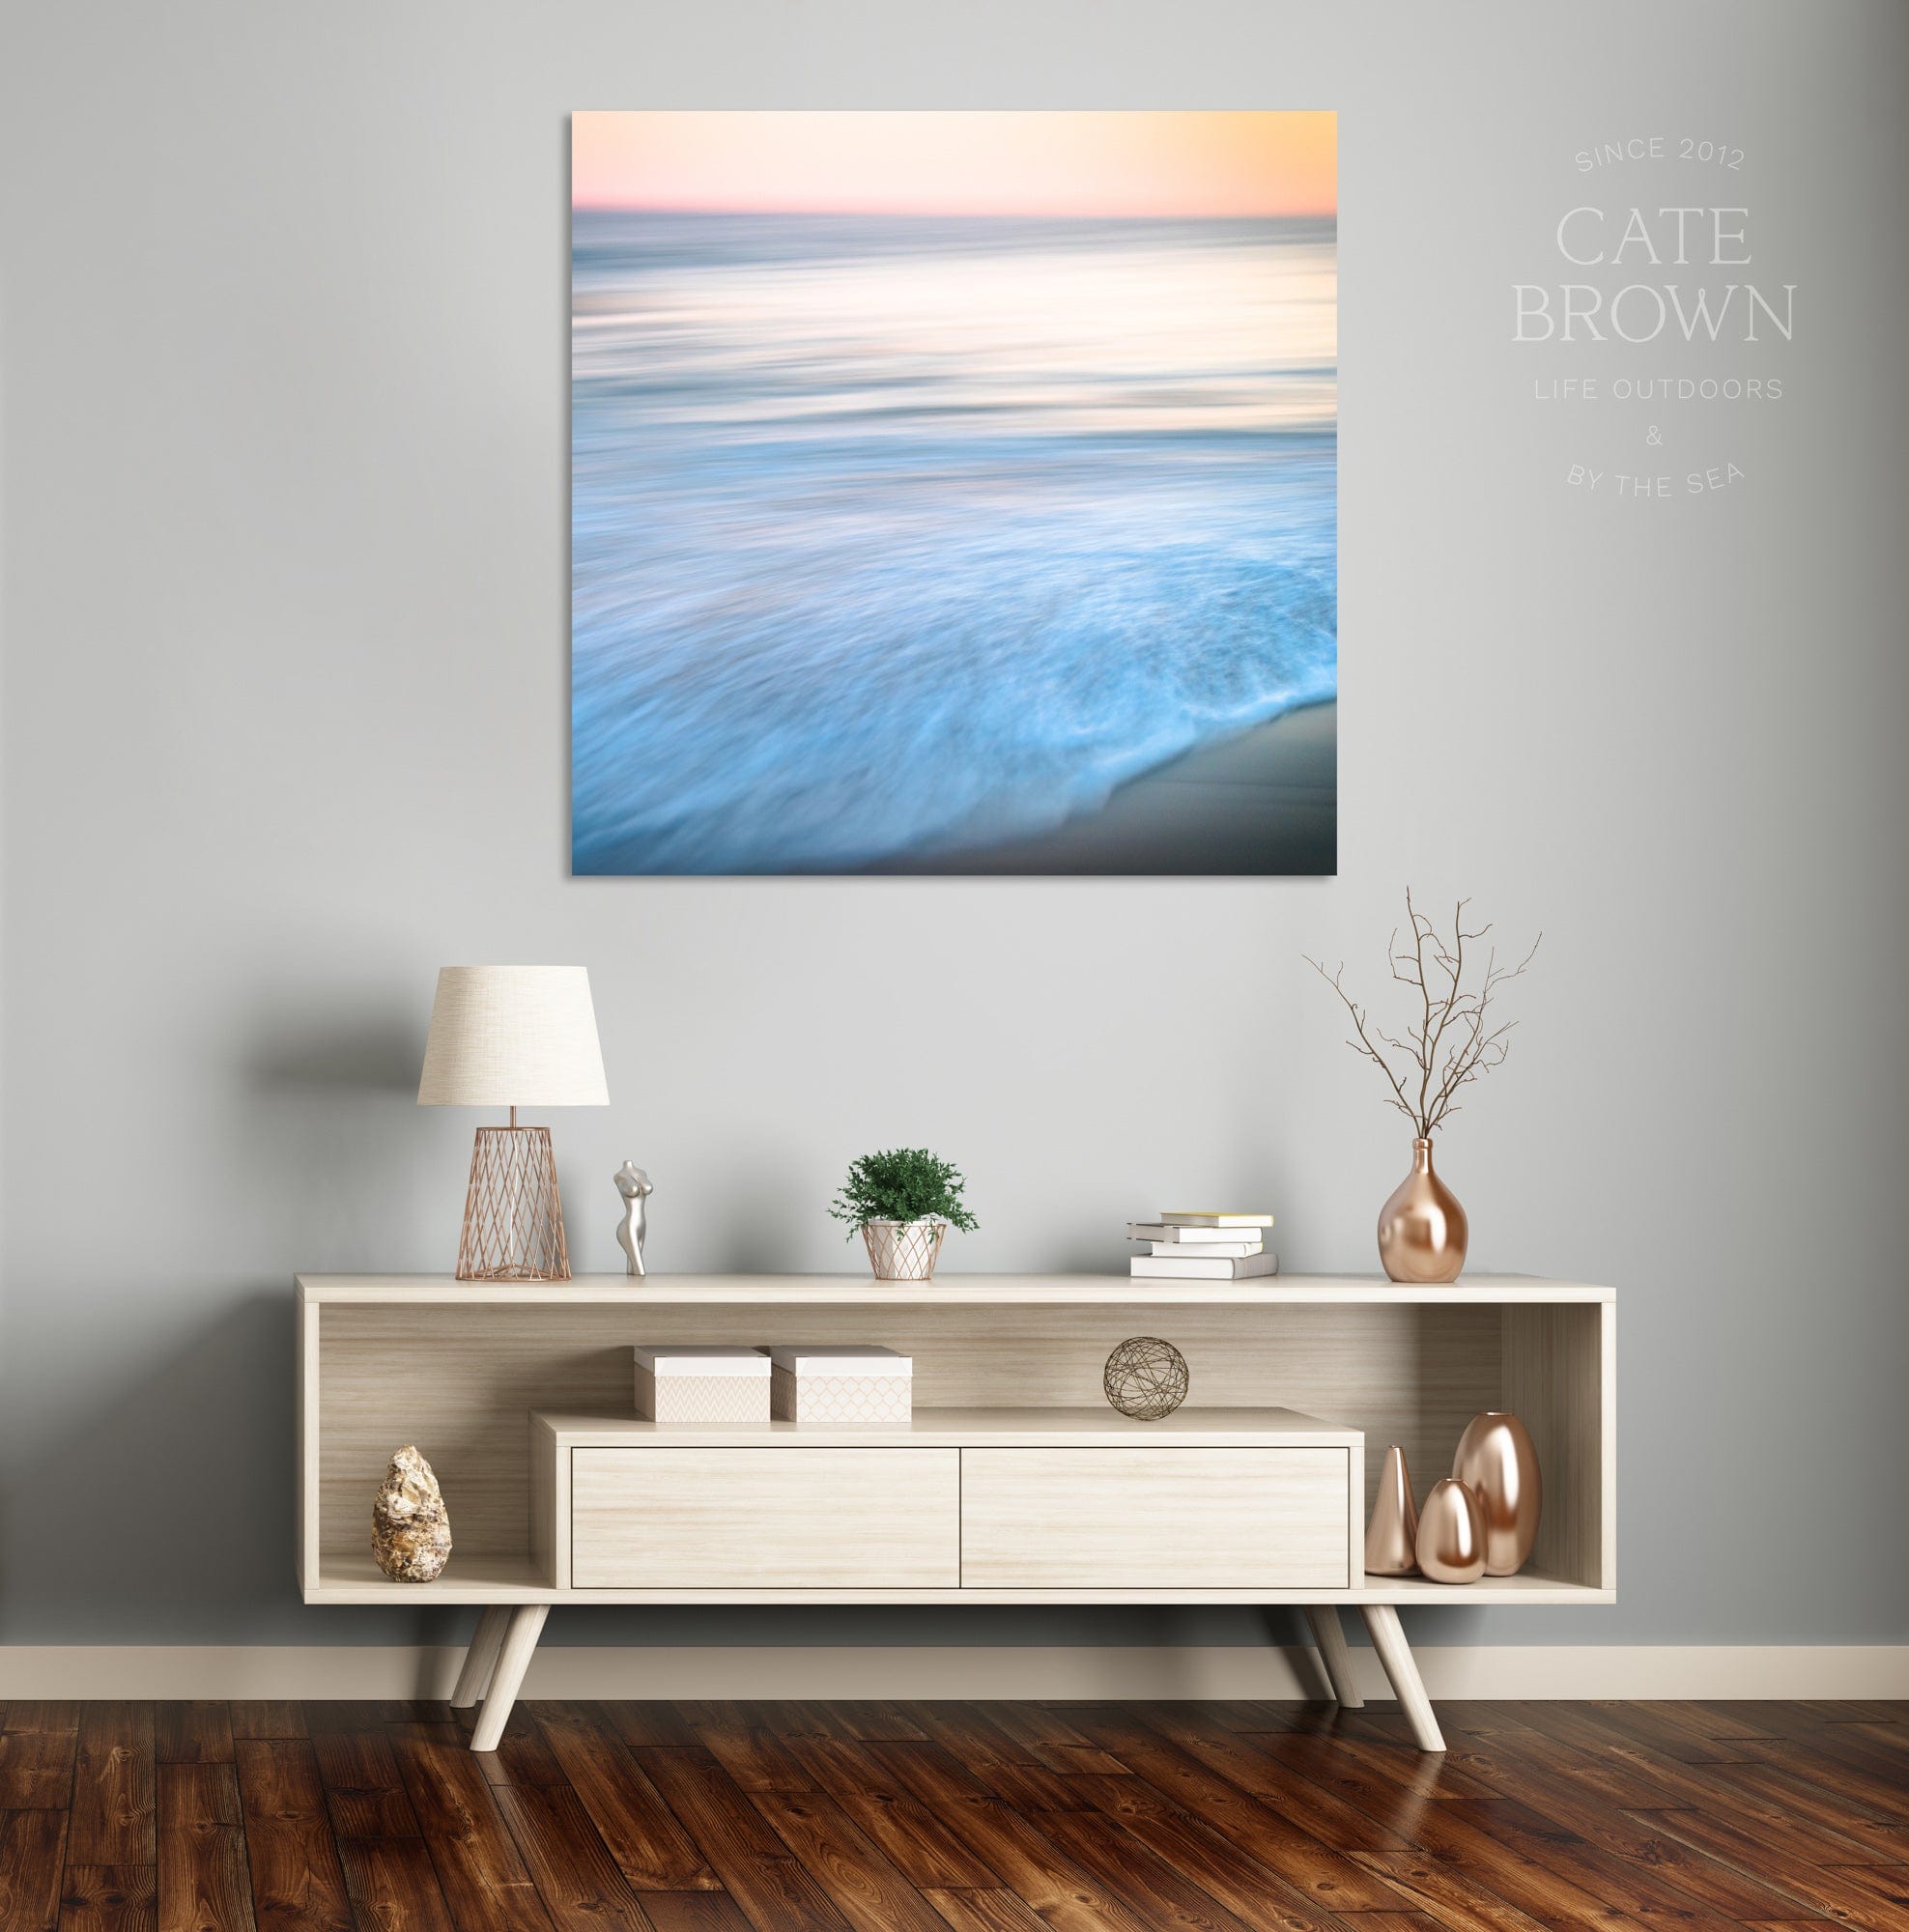 Cate Brown Photo Canvas / 16"x16" / None (Print Only) Mohegan #2  //  Abstract Photography Made to Order Ocean Fine Art